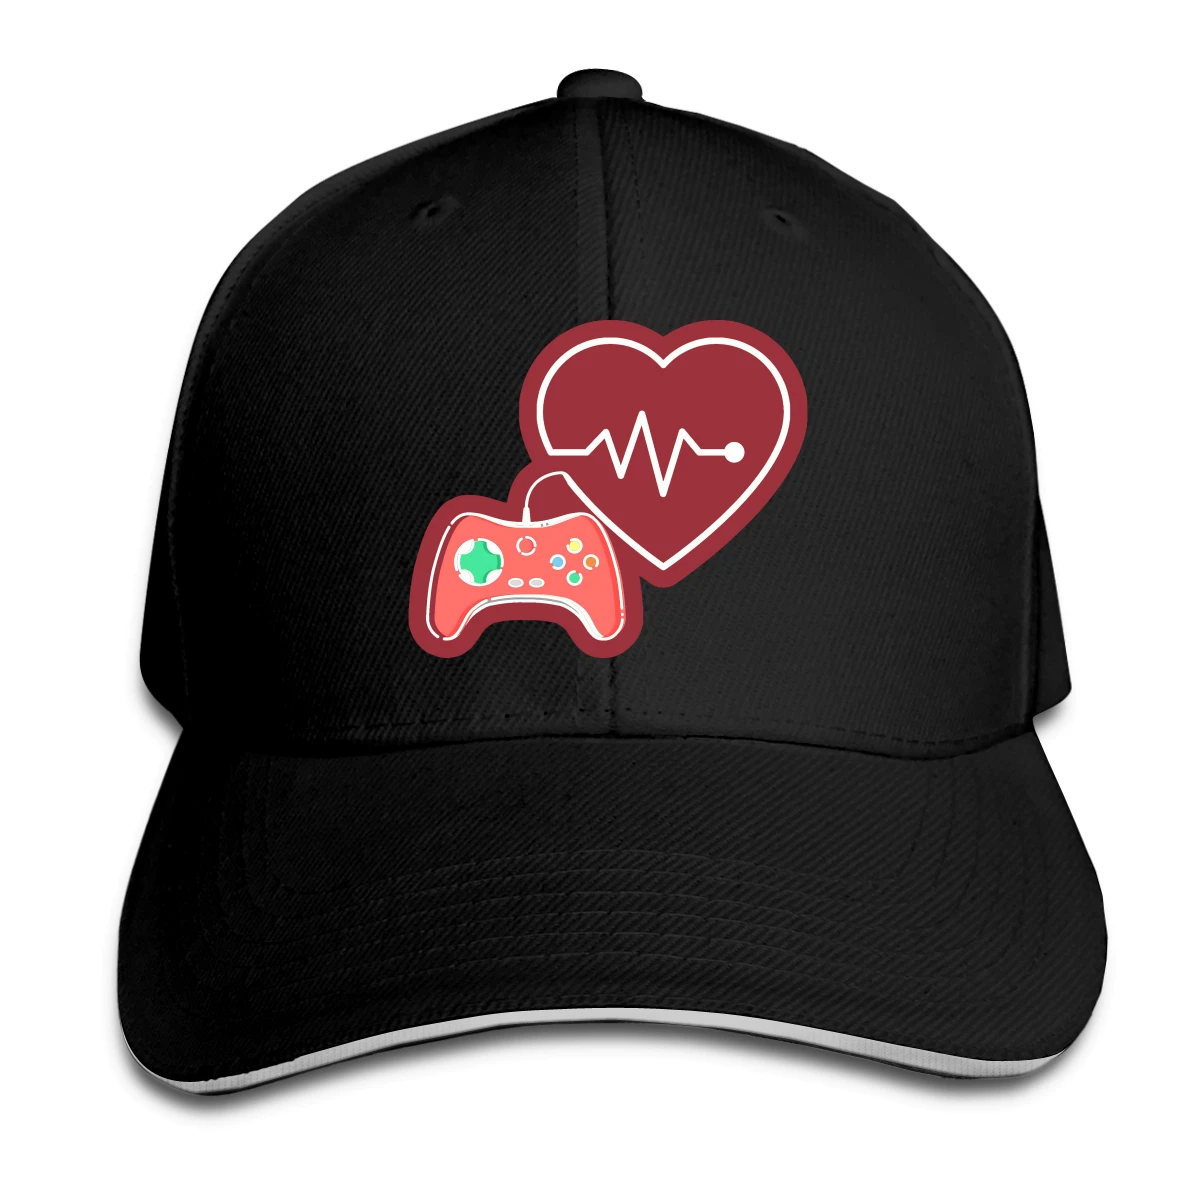 

Gamer Heartbeat Game Lover Gift man's woman Fashionable breathable Sun Caps